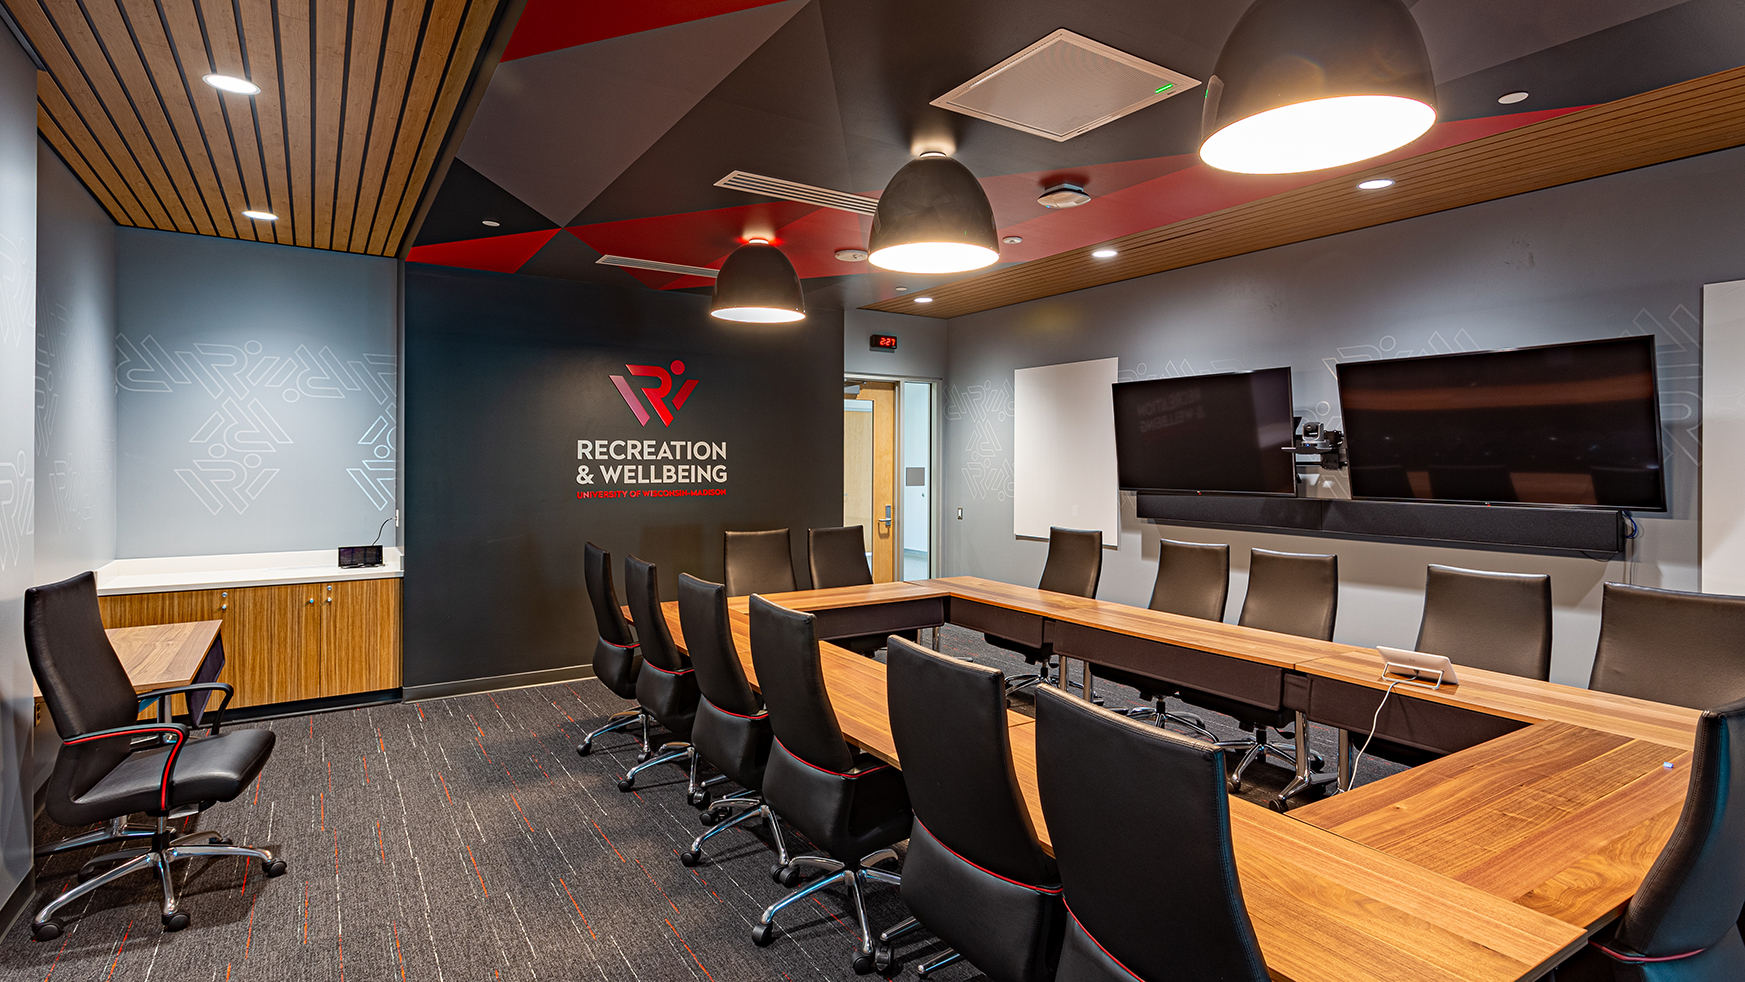 University Of Wisconsin - Recreation & Wellbeing Conference Room Facility Branding